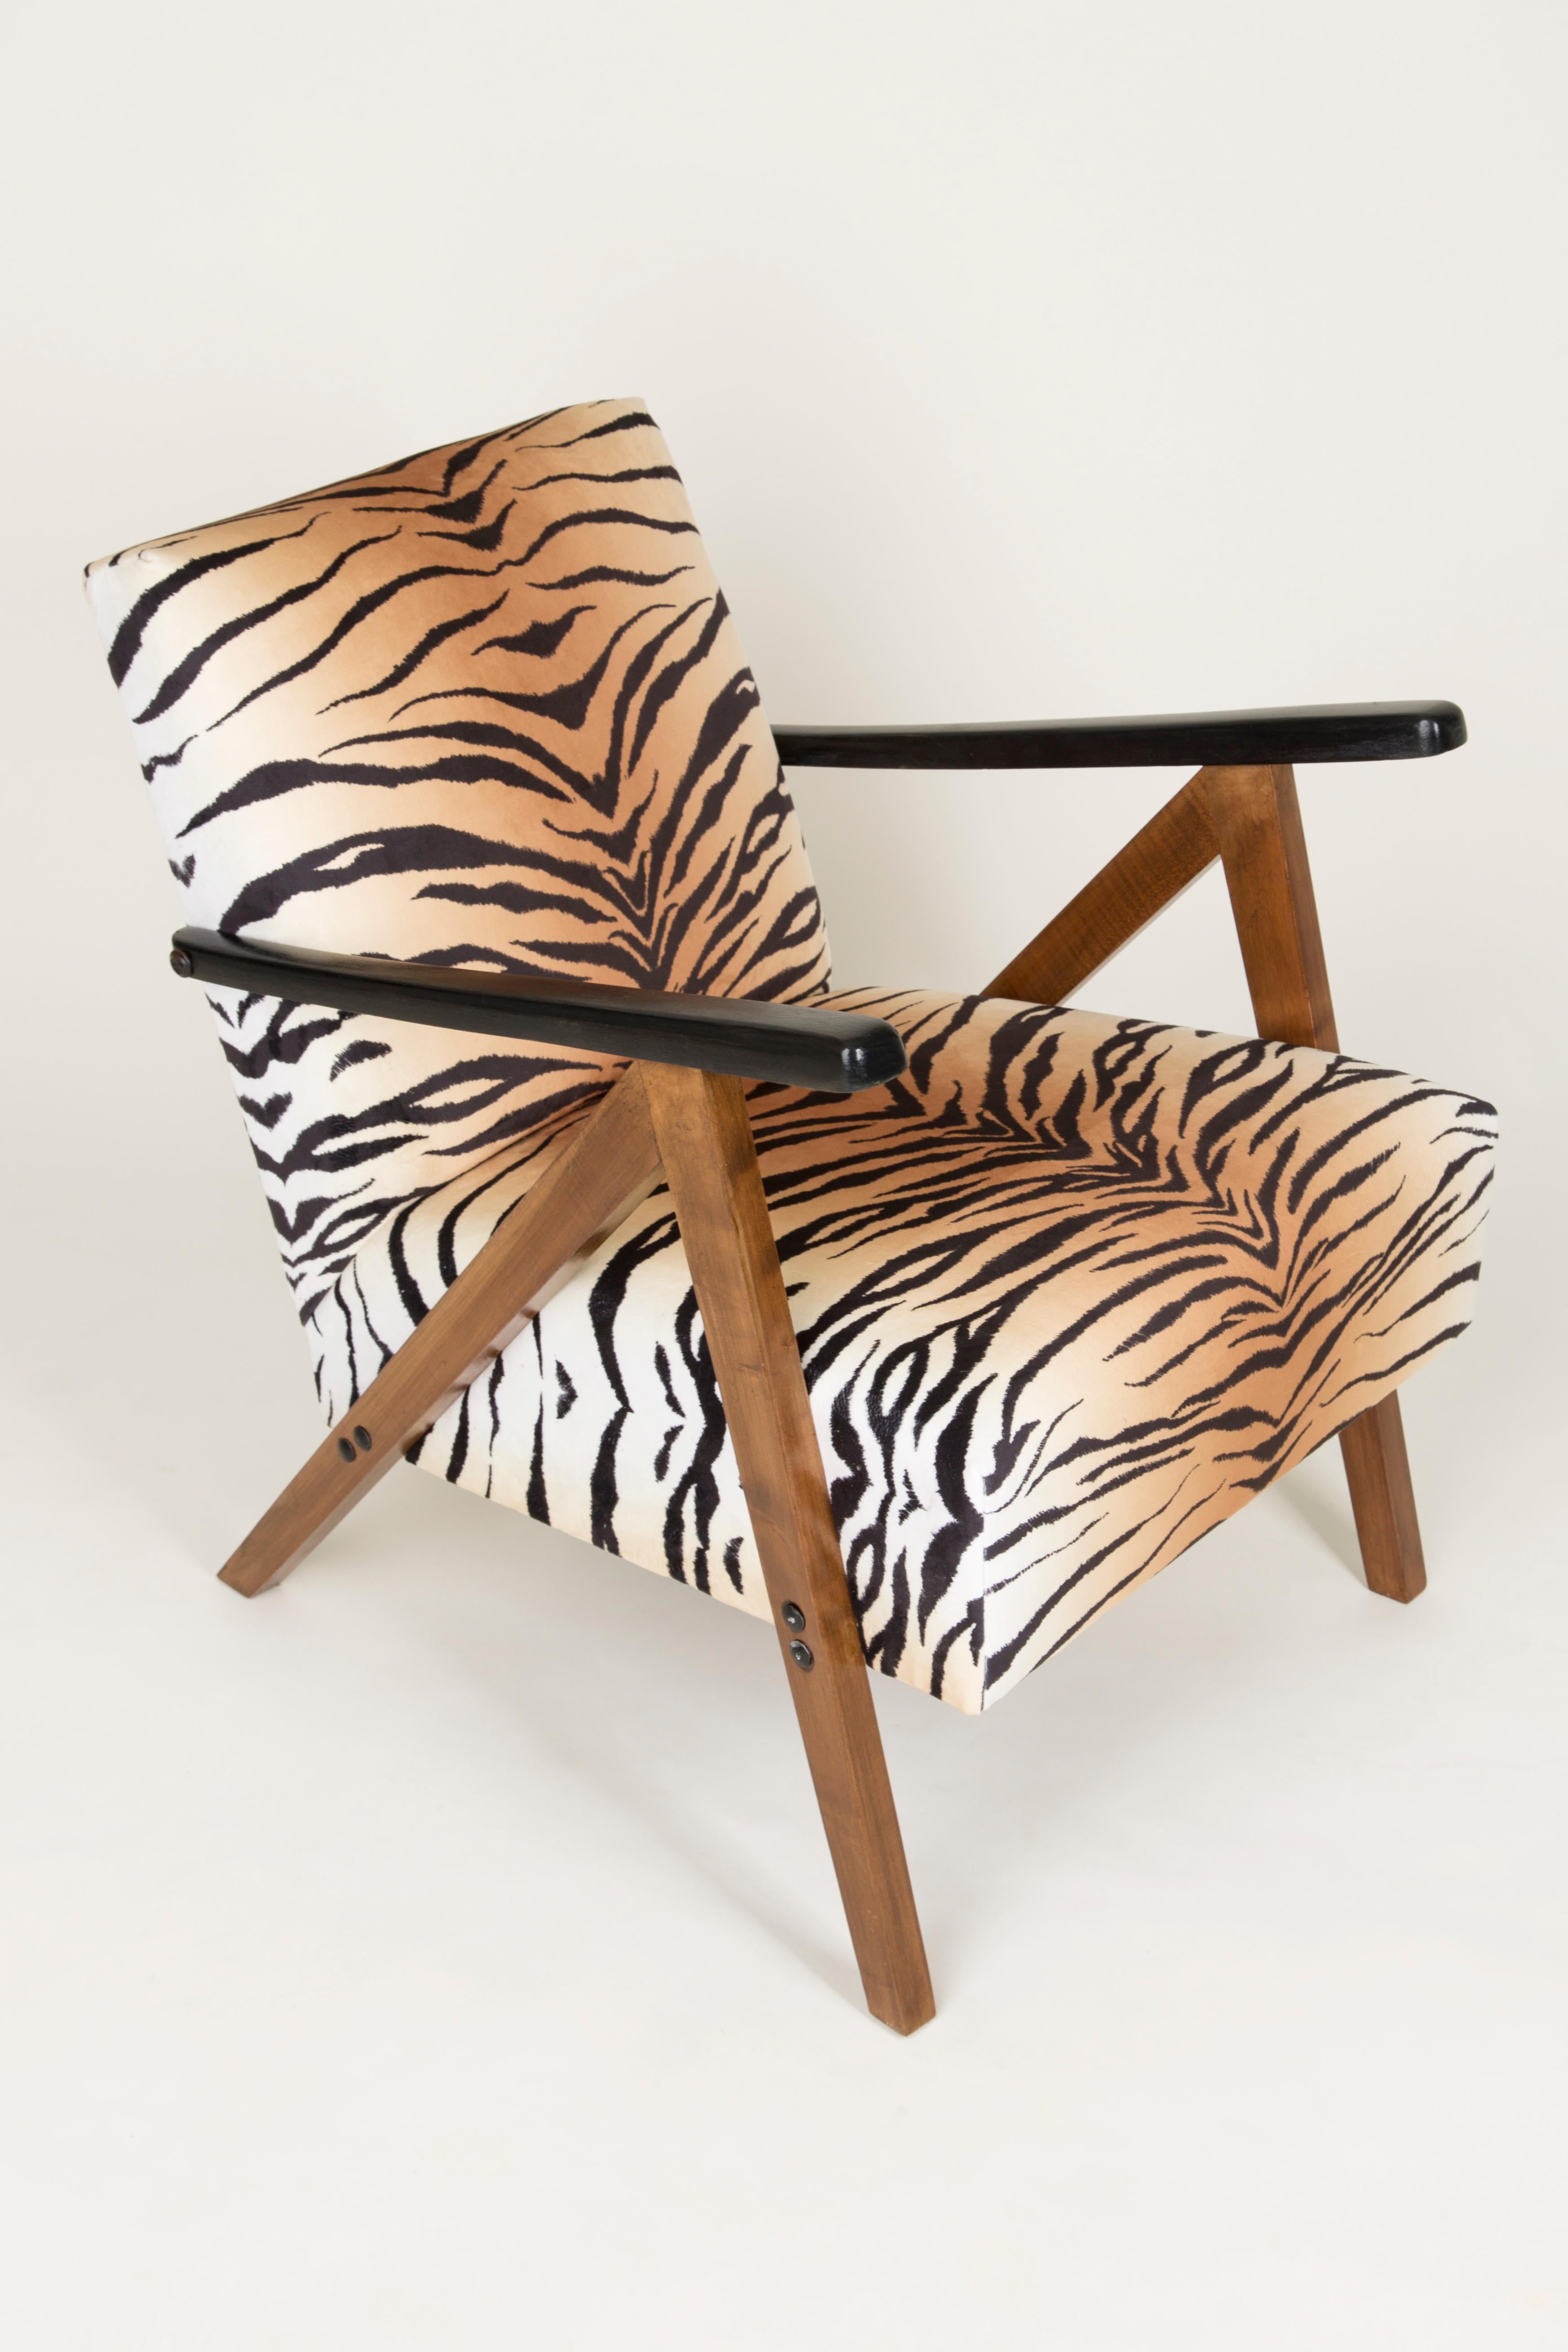 Polish Set of Two Mid-Century Modern Tiger Print Armchairs, 1960s, Germany For Sale